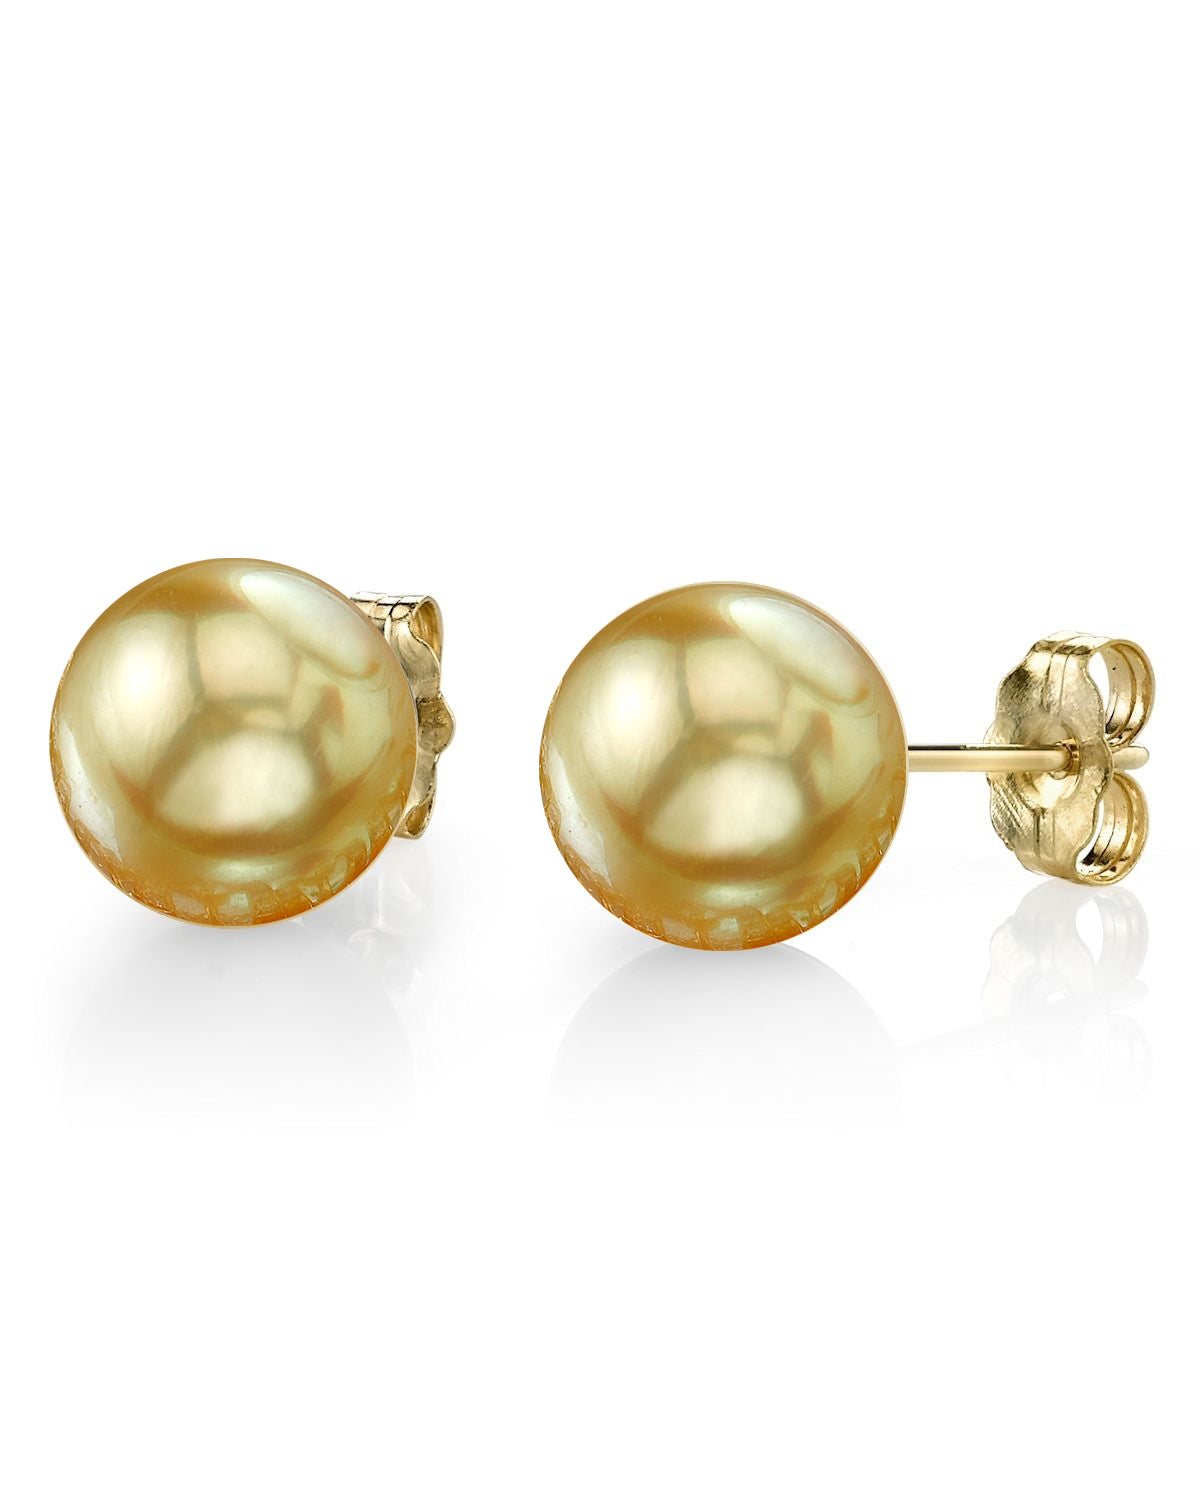 9mm Golden South Sea Round Pearl Stud Earrings- Choose Your Quality